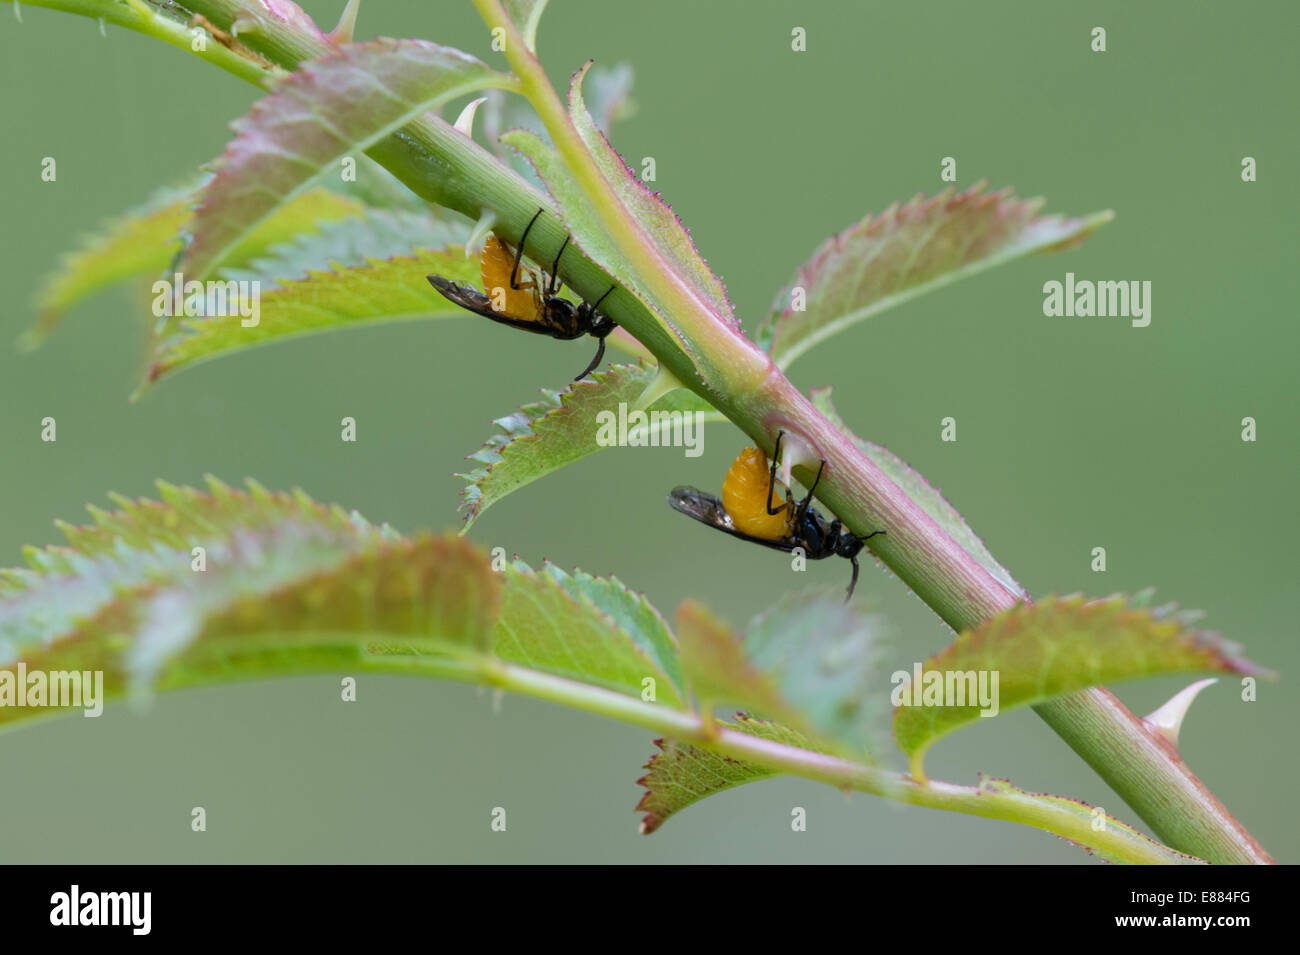 Female Large Rose Sawflies (Arge pagana) with a saw makes parallel cuts in the fresh shoots of the wild rose to lay eggs. Stock Photo